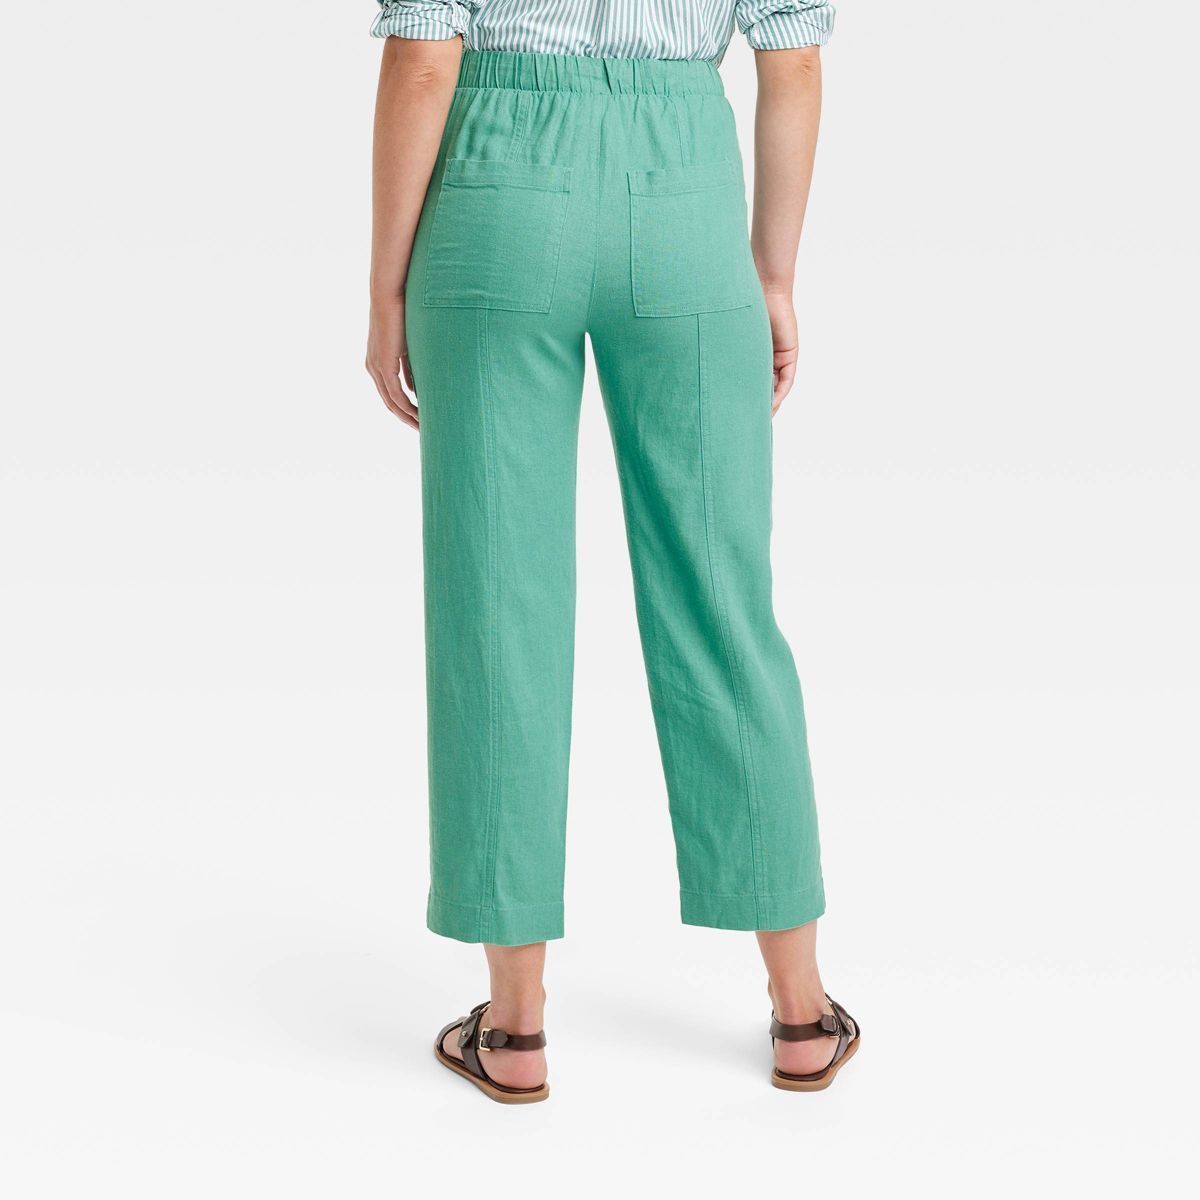 Women's High-Rise Pull-On Tapered Pants - Universal Thread™ Green L | Target